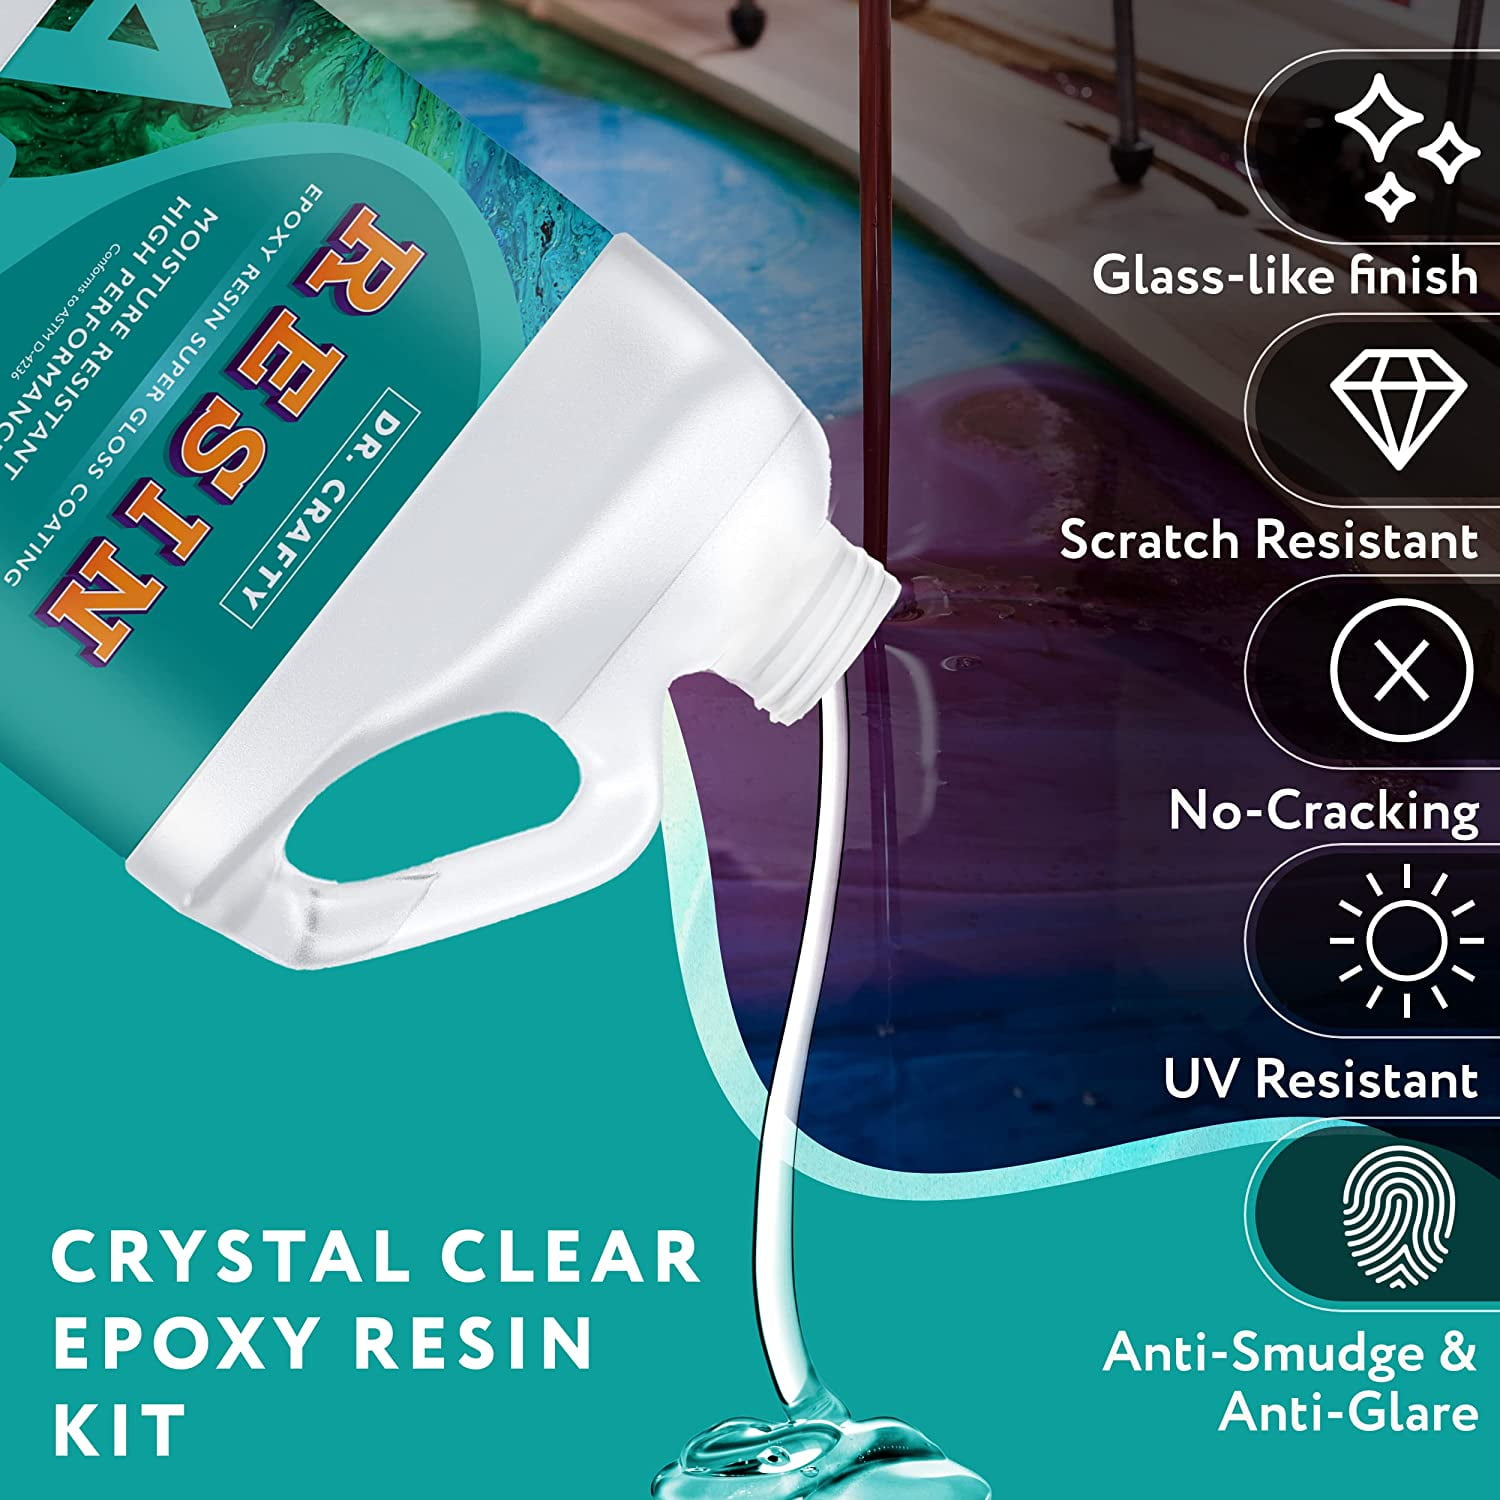  DR CRAFTY Clear Epoxy Resin - Table Top Epoxy Resin Kit - 1  Gallon Epoxy Resin for Resin Molds, Table Top, Art Resin, Craft, Jewelry  Casting, DIY, Tumblers & Wood 